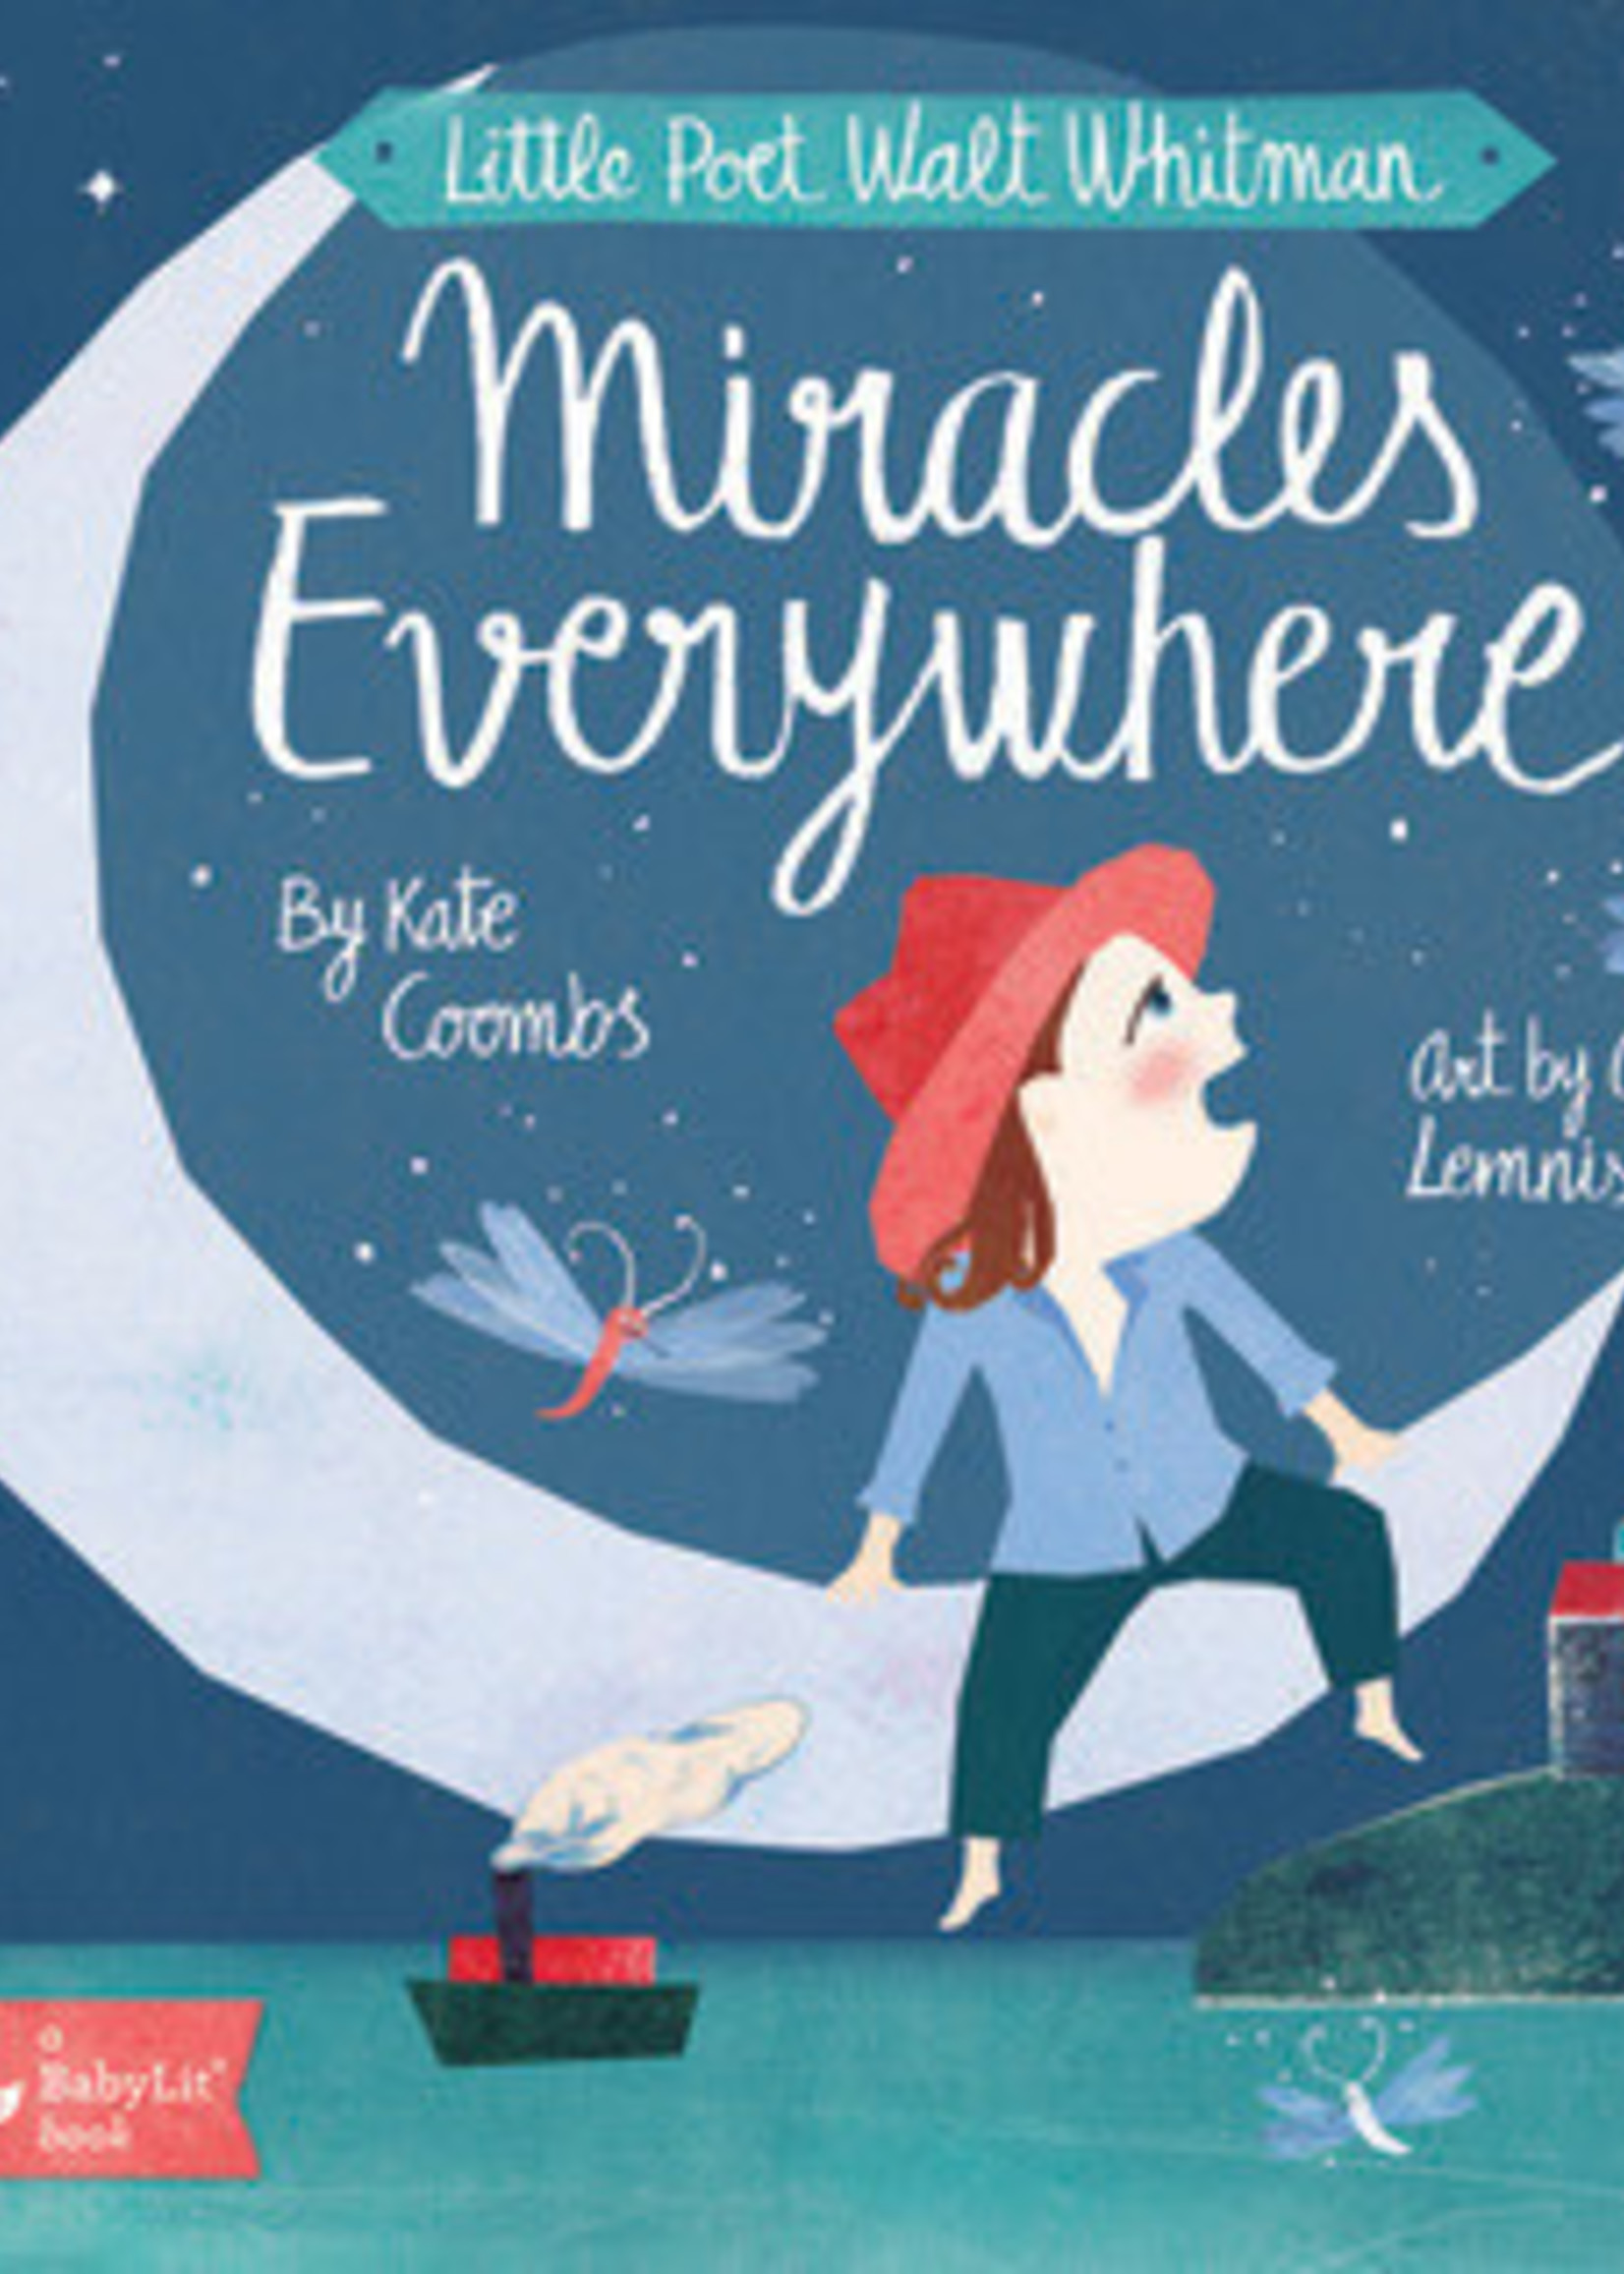 Little Poet Walt Whitman: Miracles Everywhere by Kate Coombs,  Carme Lemniscates